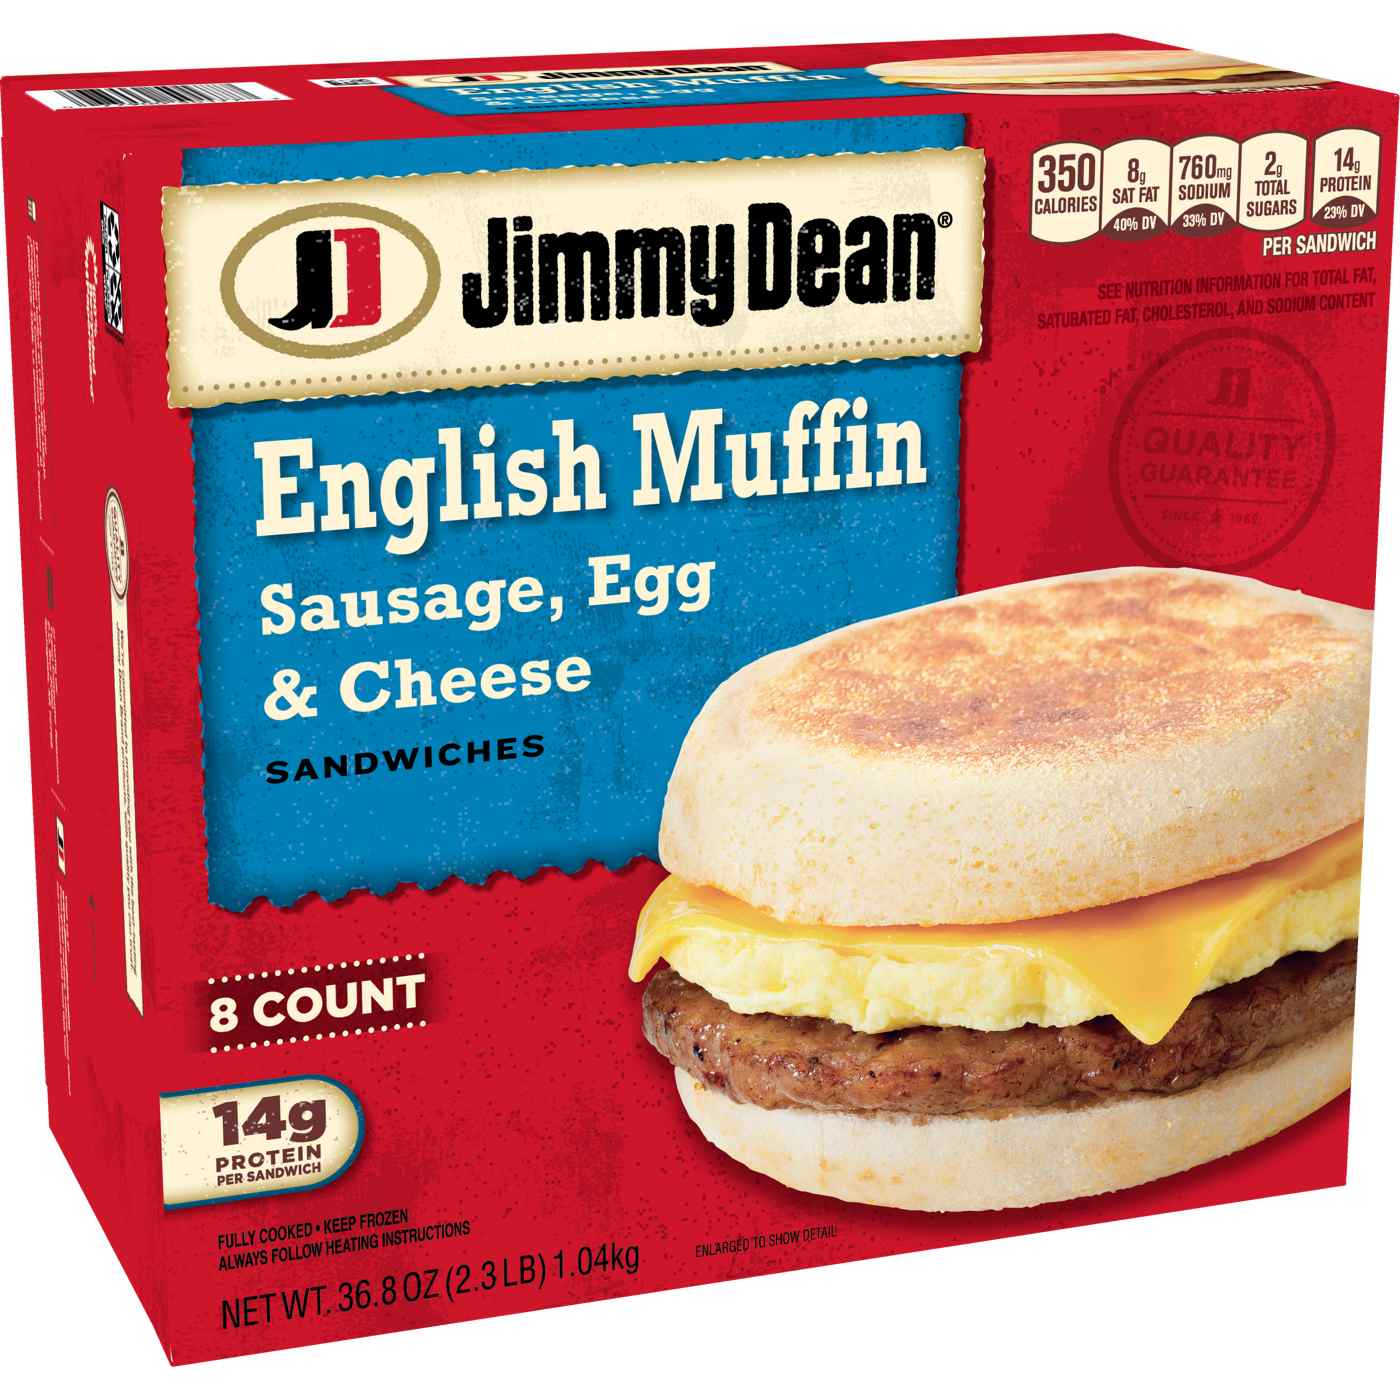 Jimmy Dean Sausage, Egg & Cheese English Muffin Sandwiches; image 3 of 5